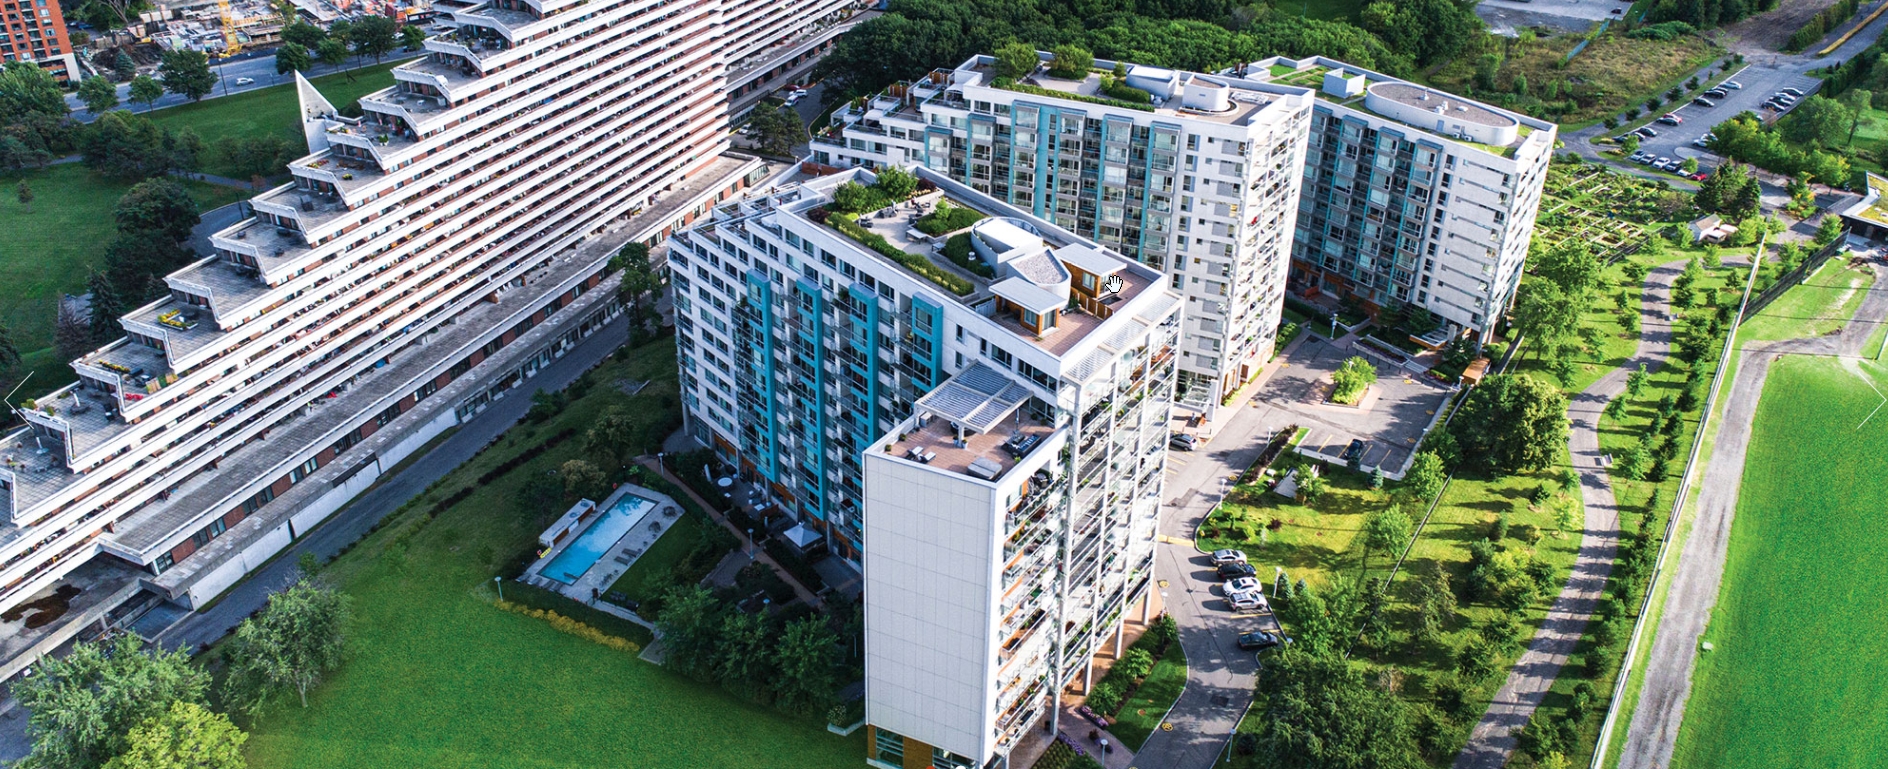 Le Groupe Jenaco To Be Part of Phases 4 and 5 of the Harmonia Condos Cité Nature Project